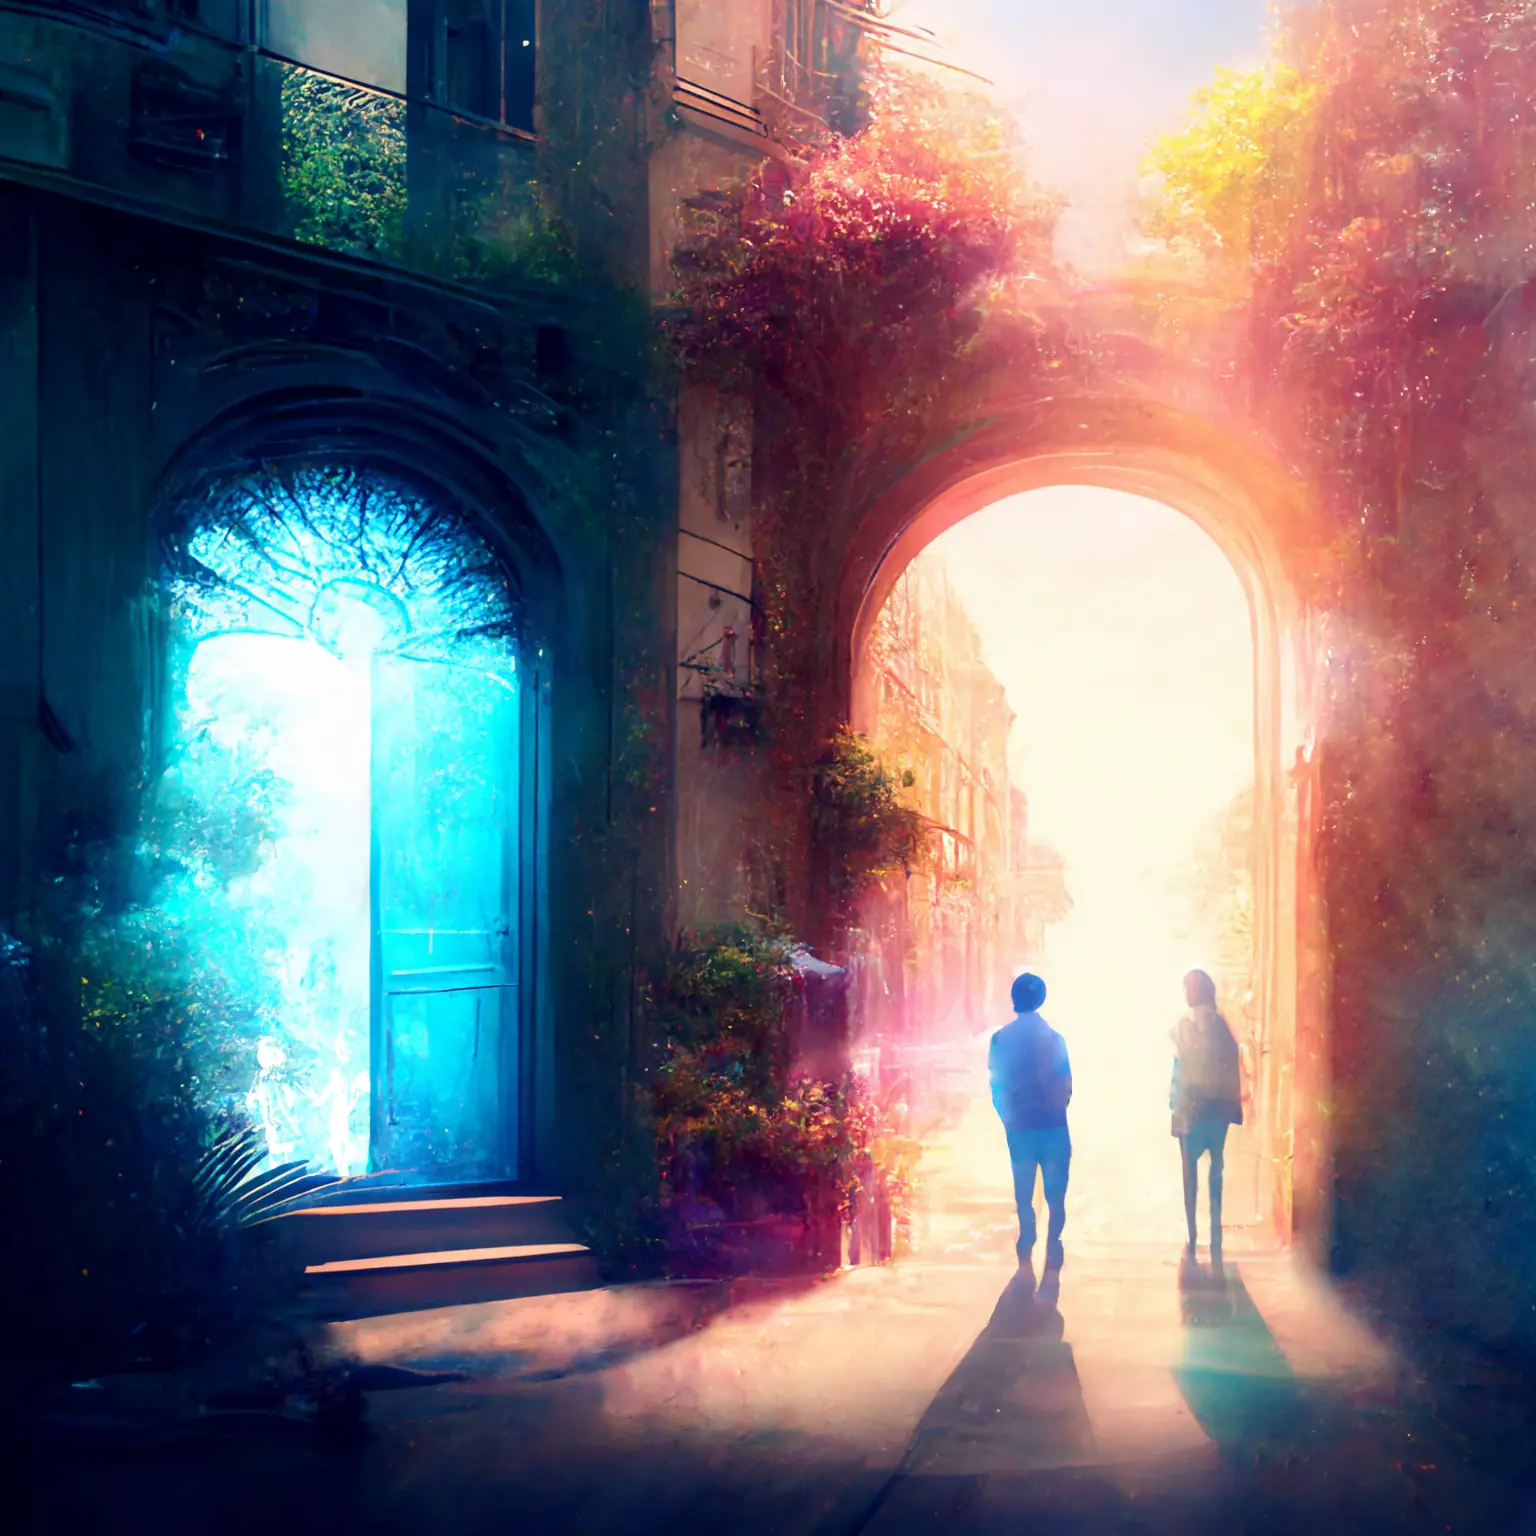 Two people are looking out a doorway toward a bright day, the sun makes everything hazy. Beside them is another doorway to another bright day bathed in blue light.